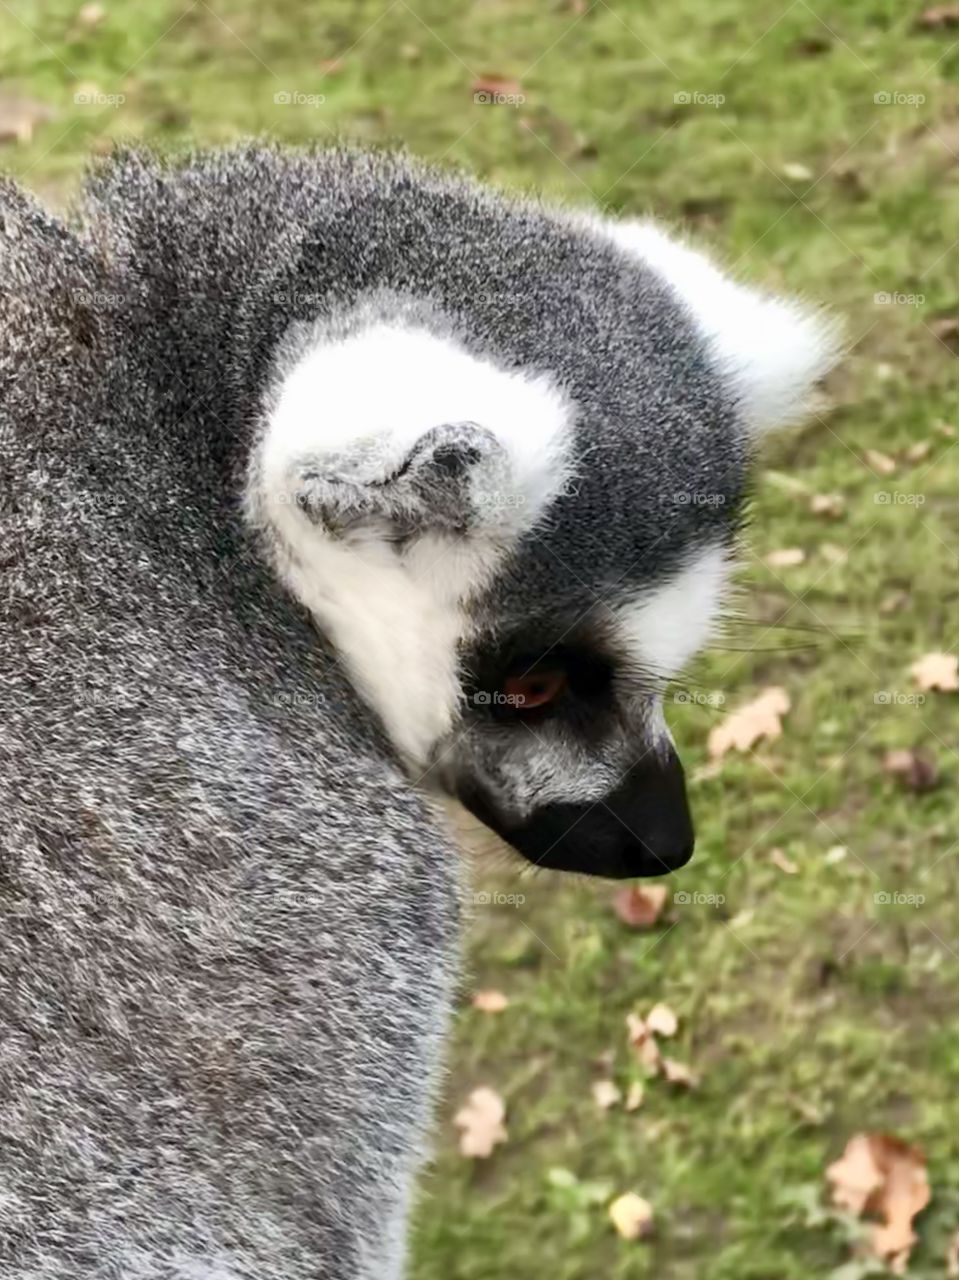 Side profile of black and white lemur in close up